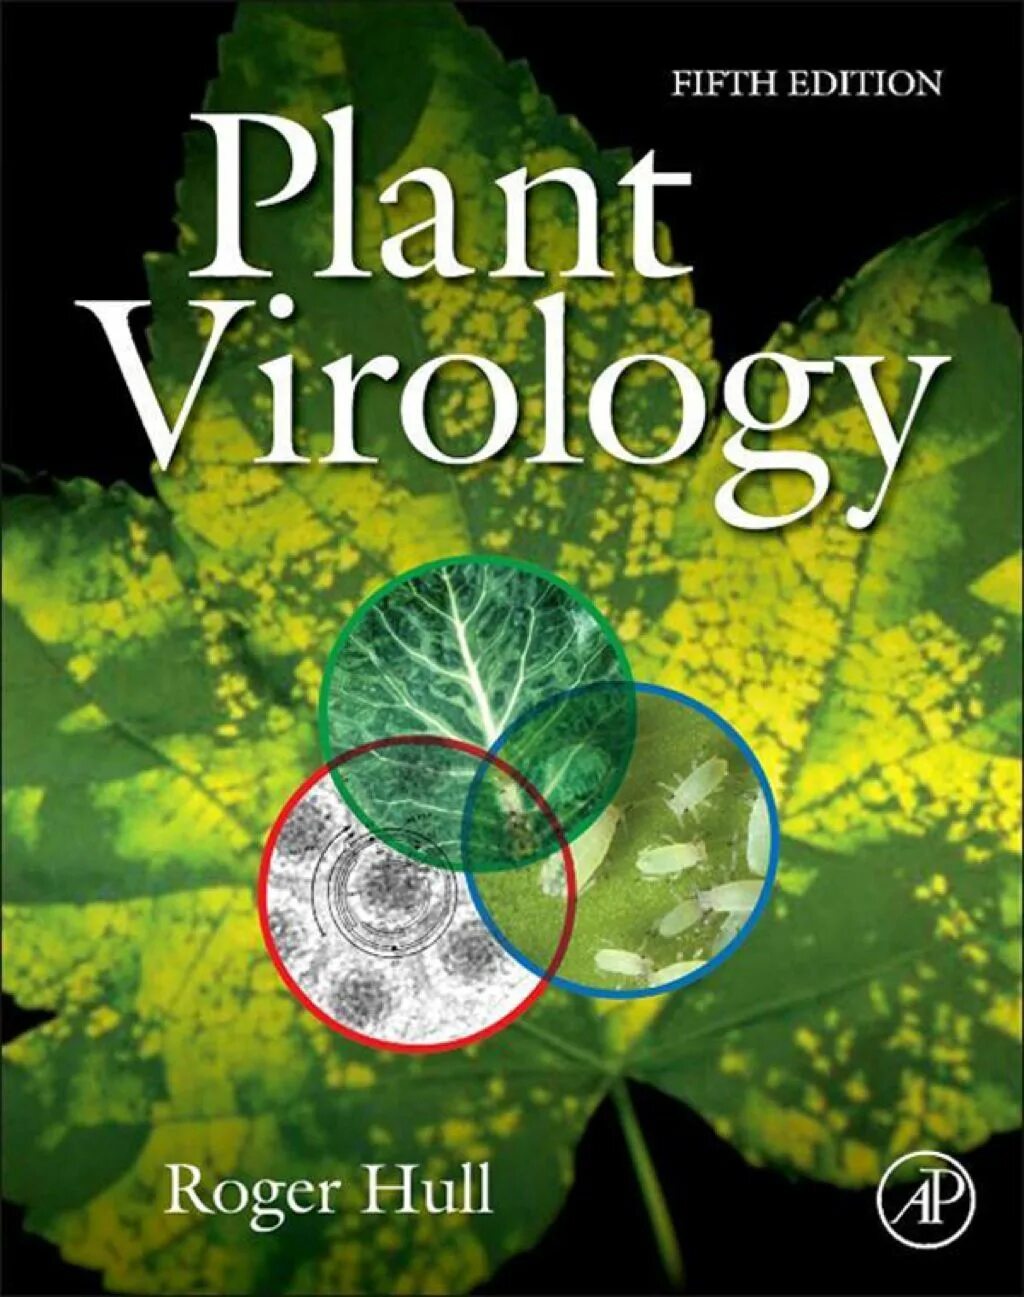 Virology of the book. The Plant книга. Plant Virology. Plant Virology book.